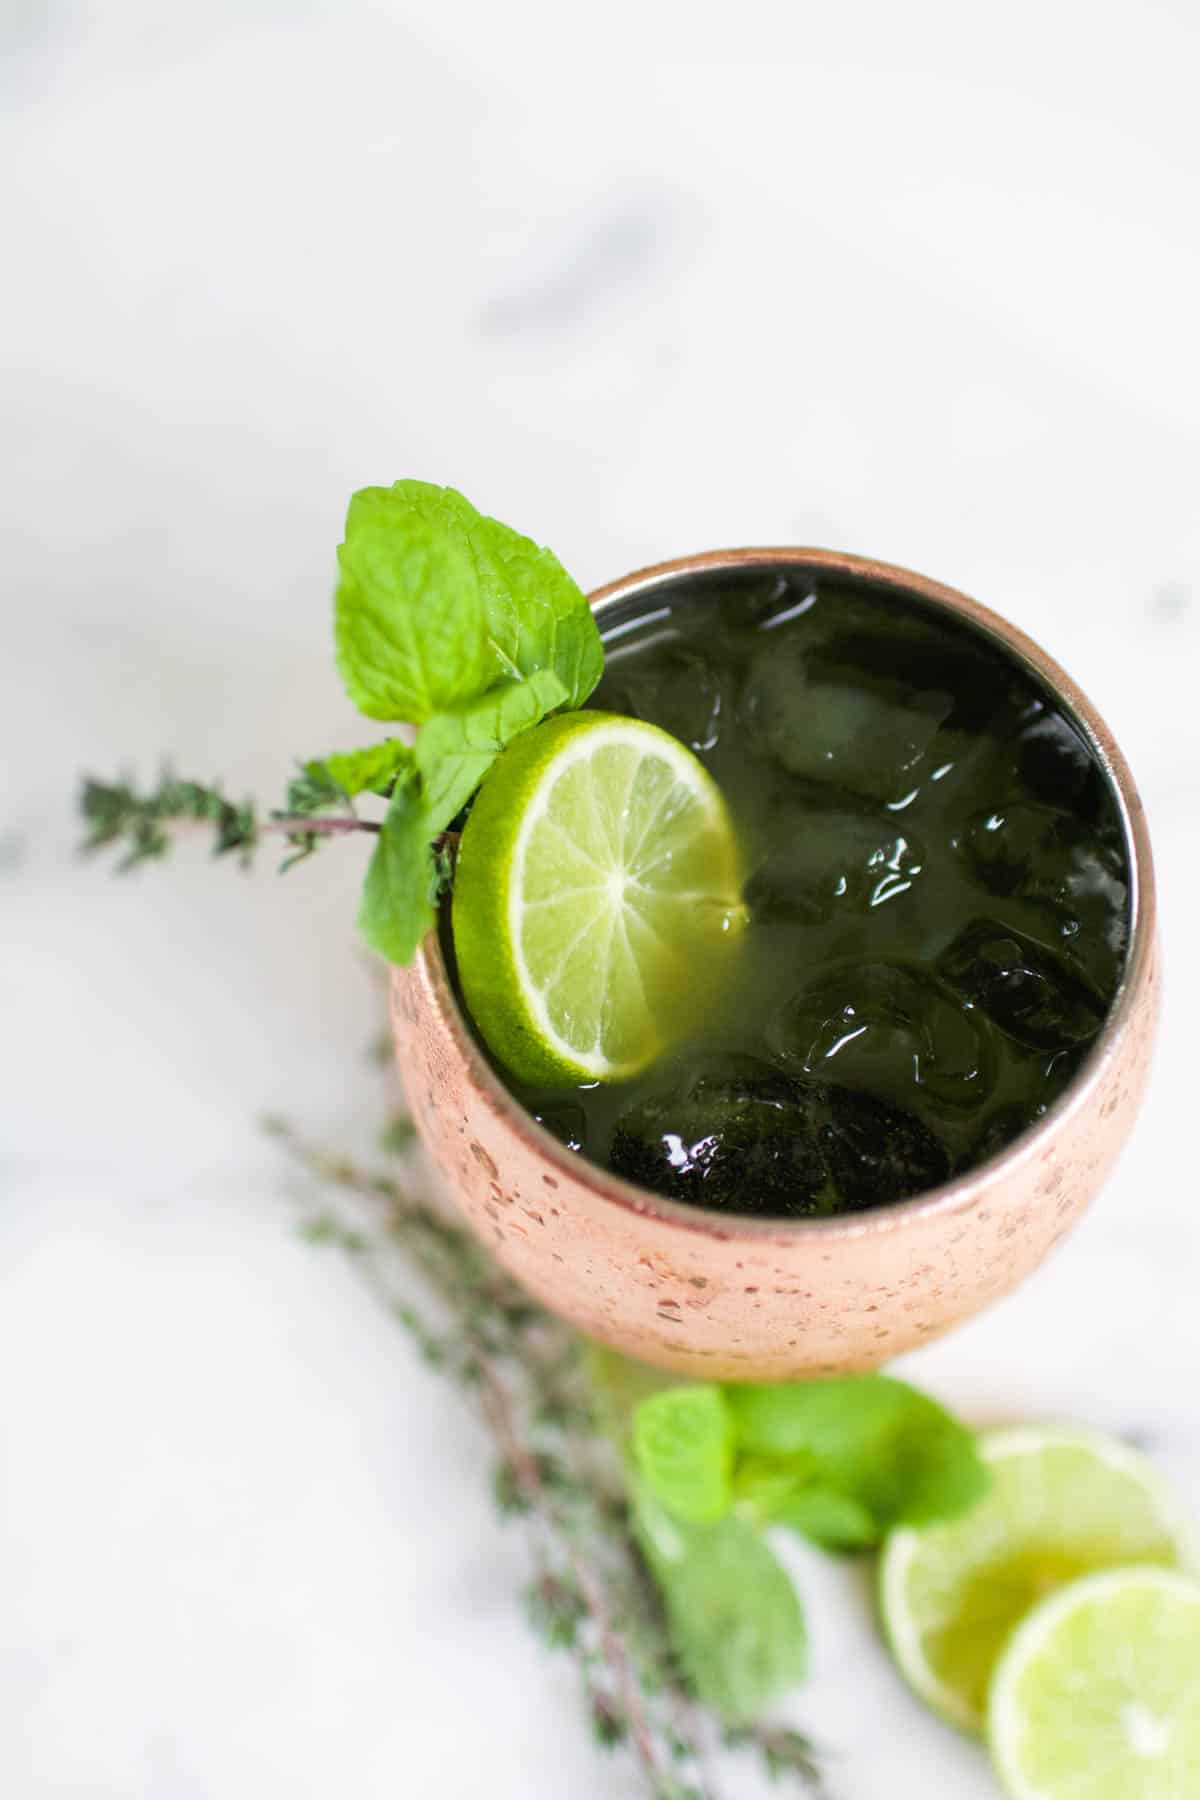 Top down view of a copper Moscow Mule mug holding a cocktail and garnished with a lime slice and fresh herbs.